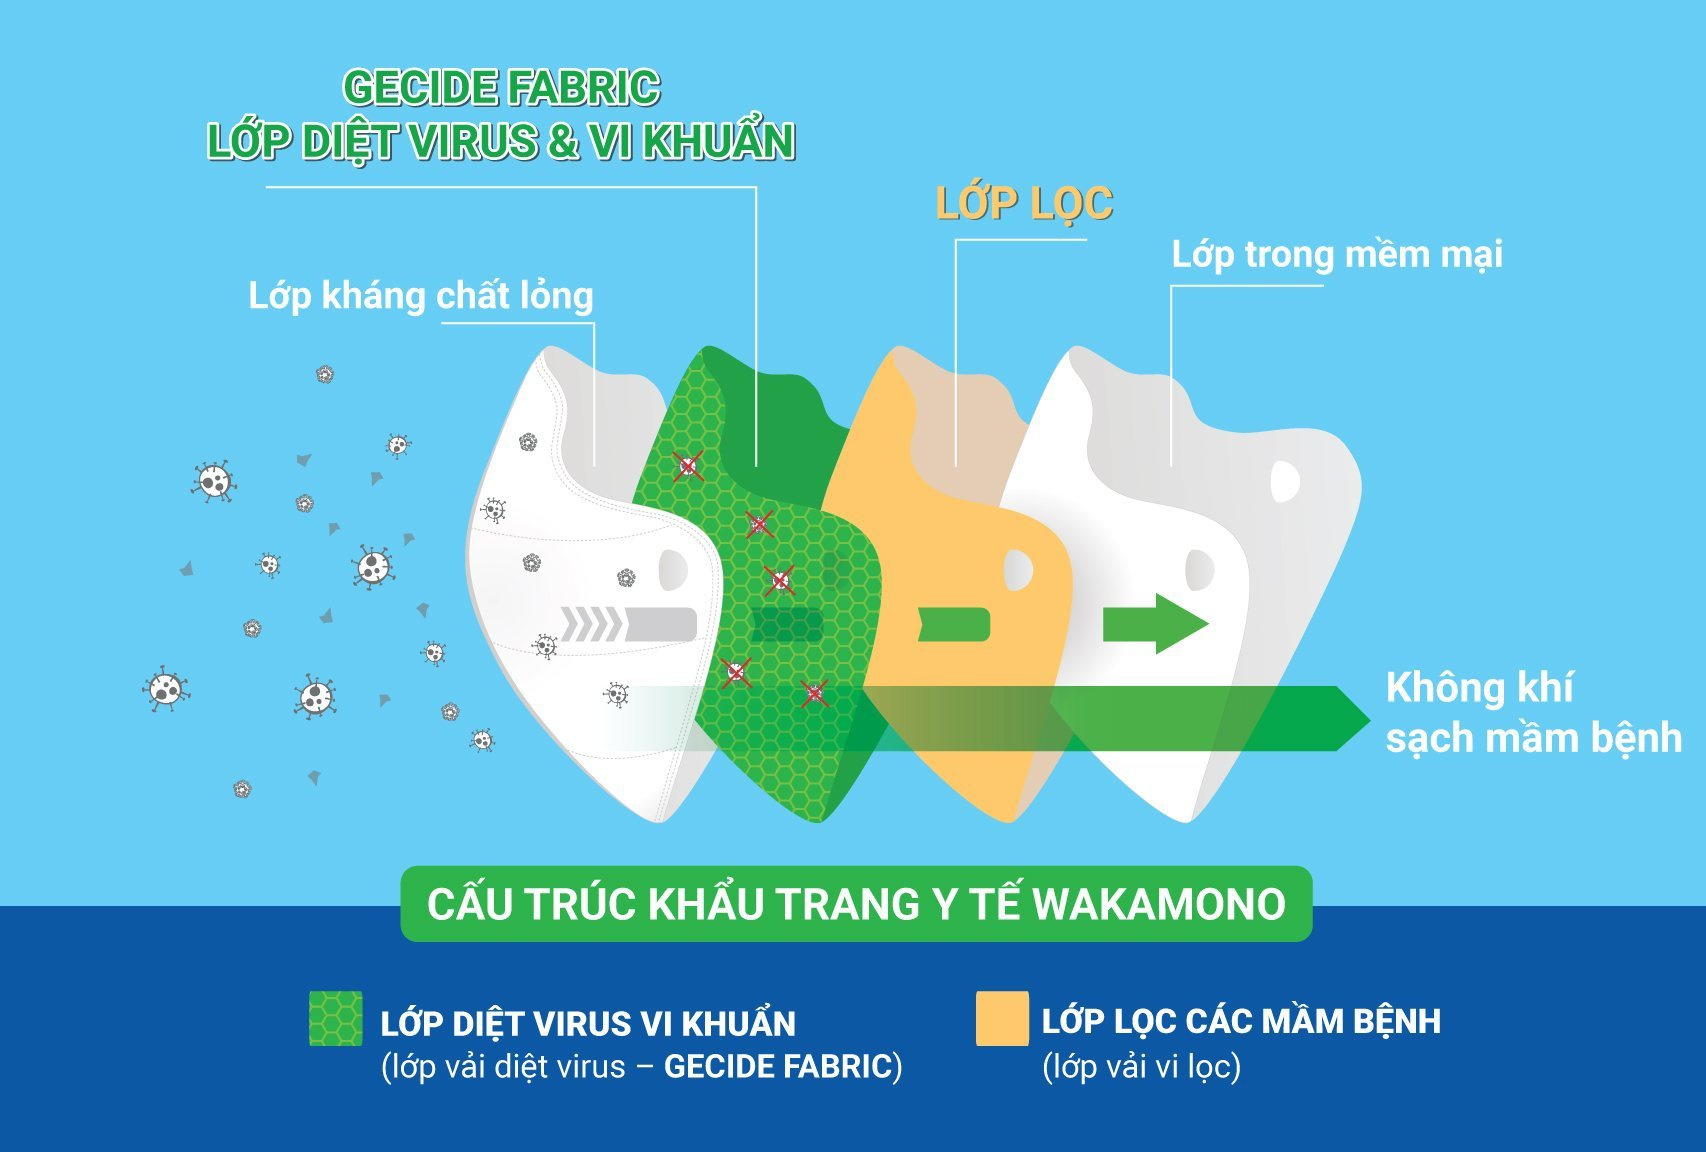 Vietnam makes world's first mask with Covid-killing ability